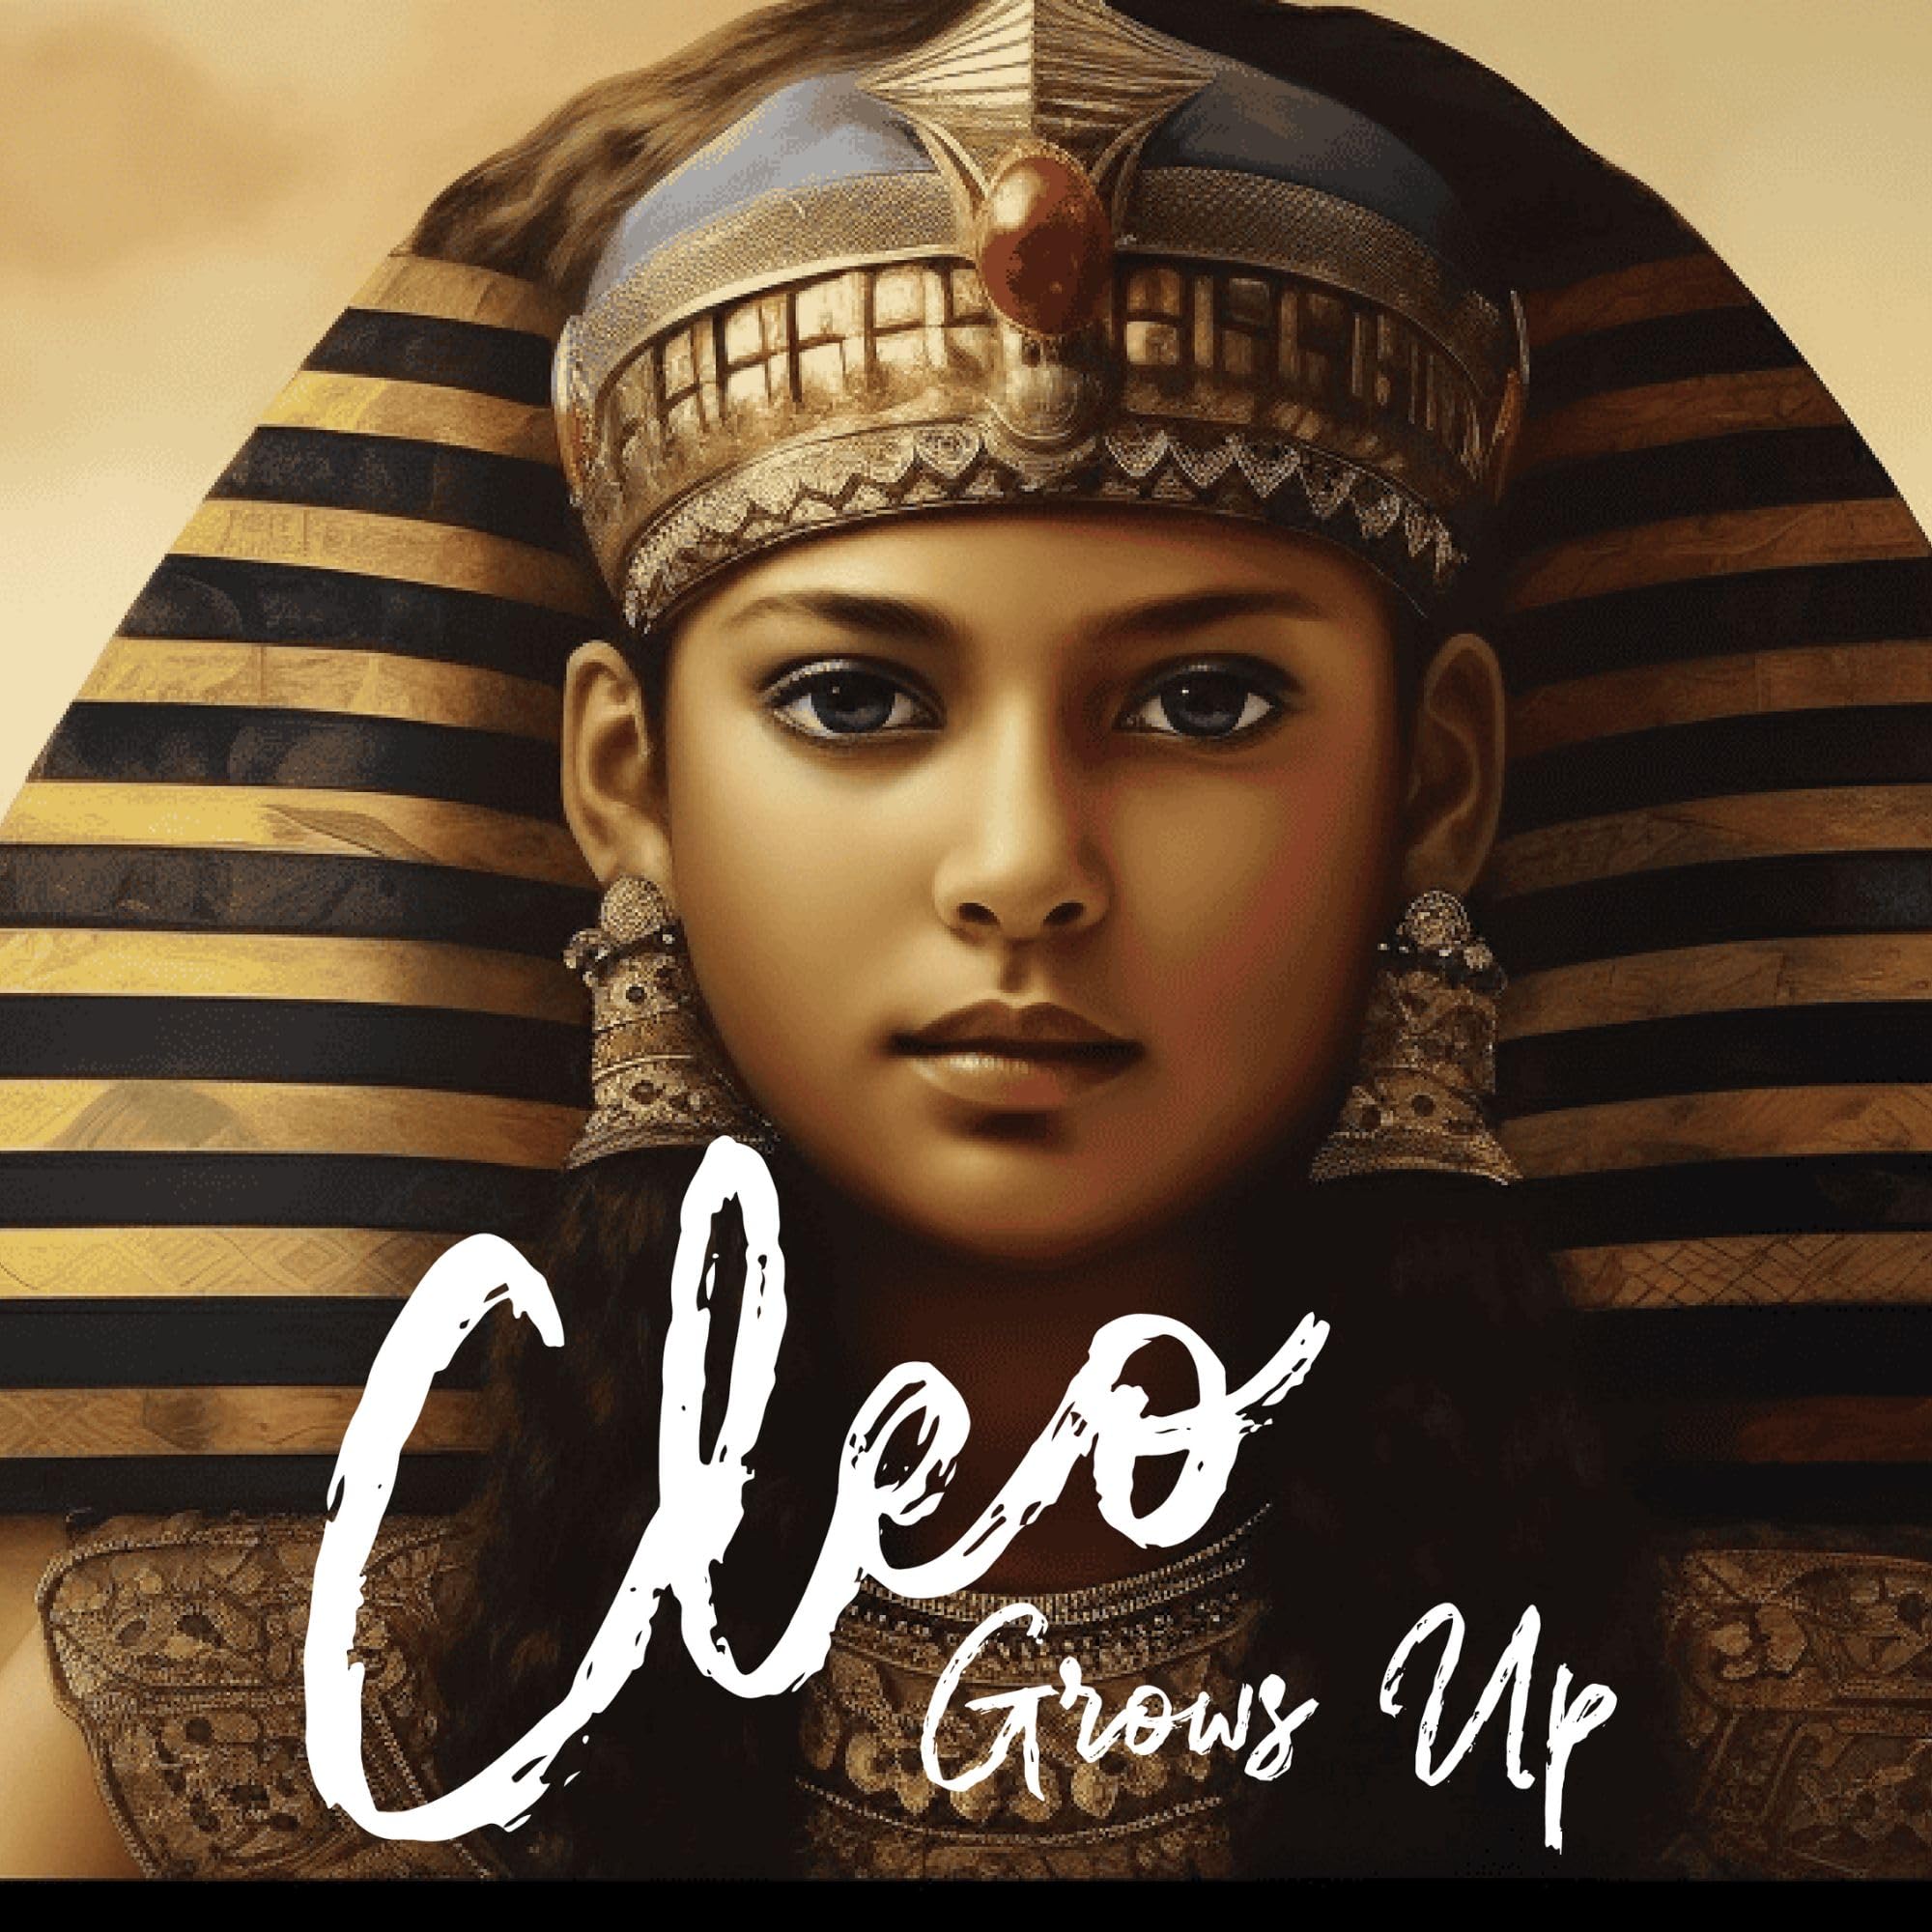 Cleo Grows Up: from Little Princess to Beloved Egyptian Queen - an Introduction to the Life and Adventures of Queen Cleopatra for Curious Kids (Her Story, Inspirational Women of the World Book 1)